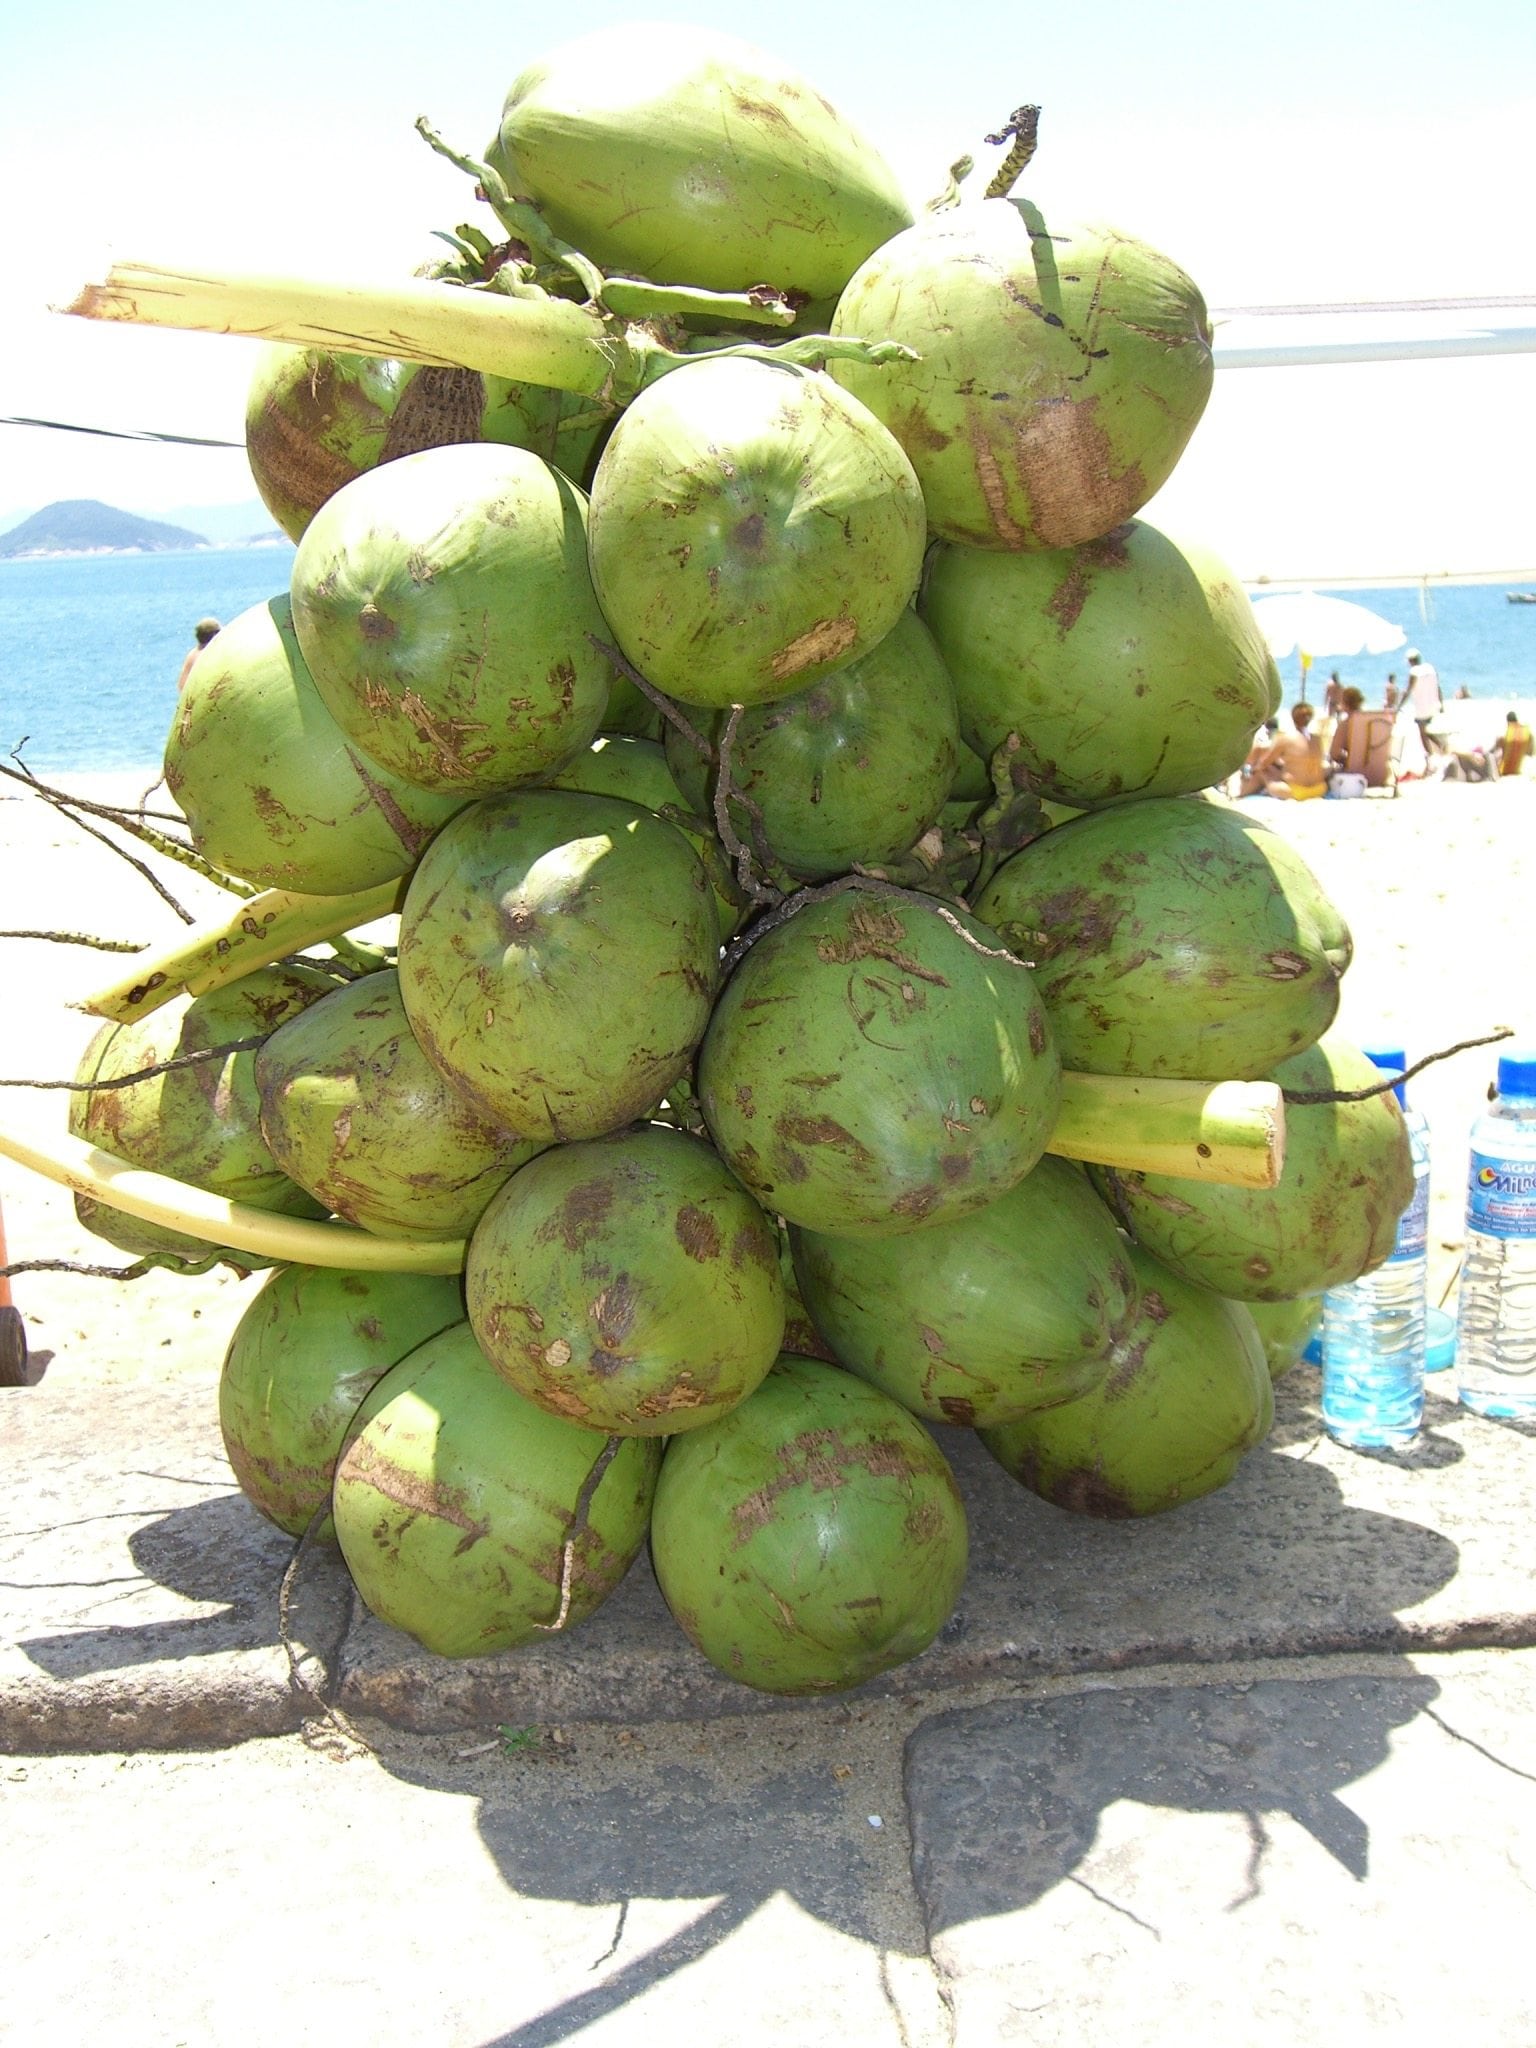 Raw coconuts on the beach